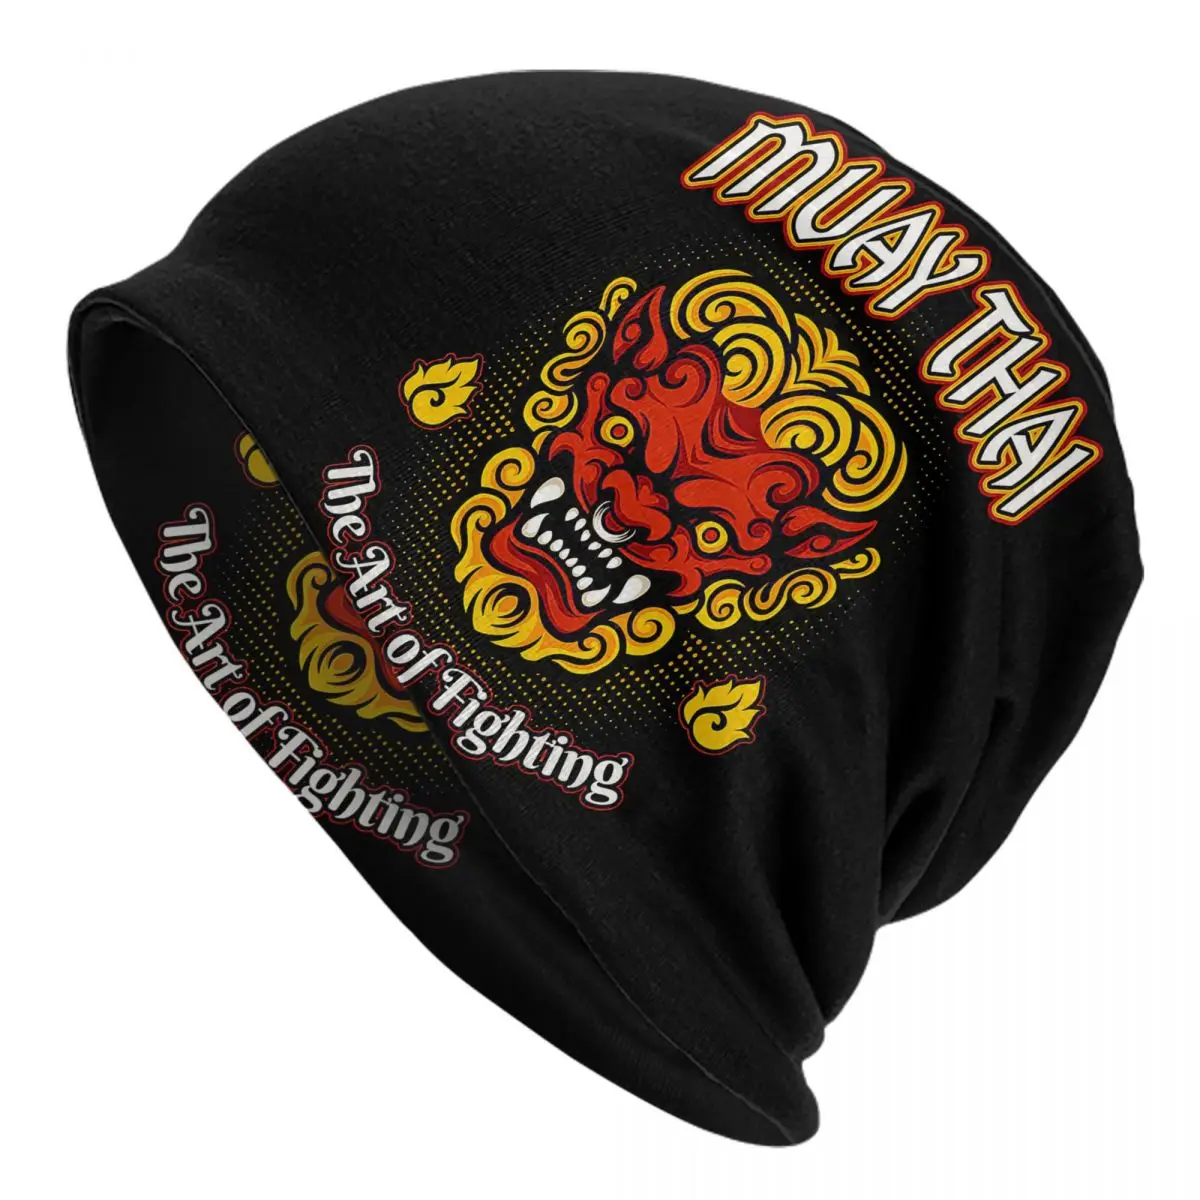 Hobby Karate Muay Thai Martial Arts Adult Men's Women's Knit Hat Keep warm winter Funny knitted hat